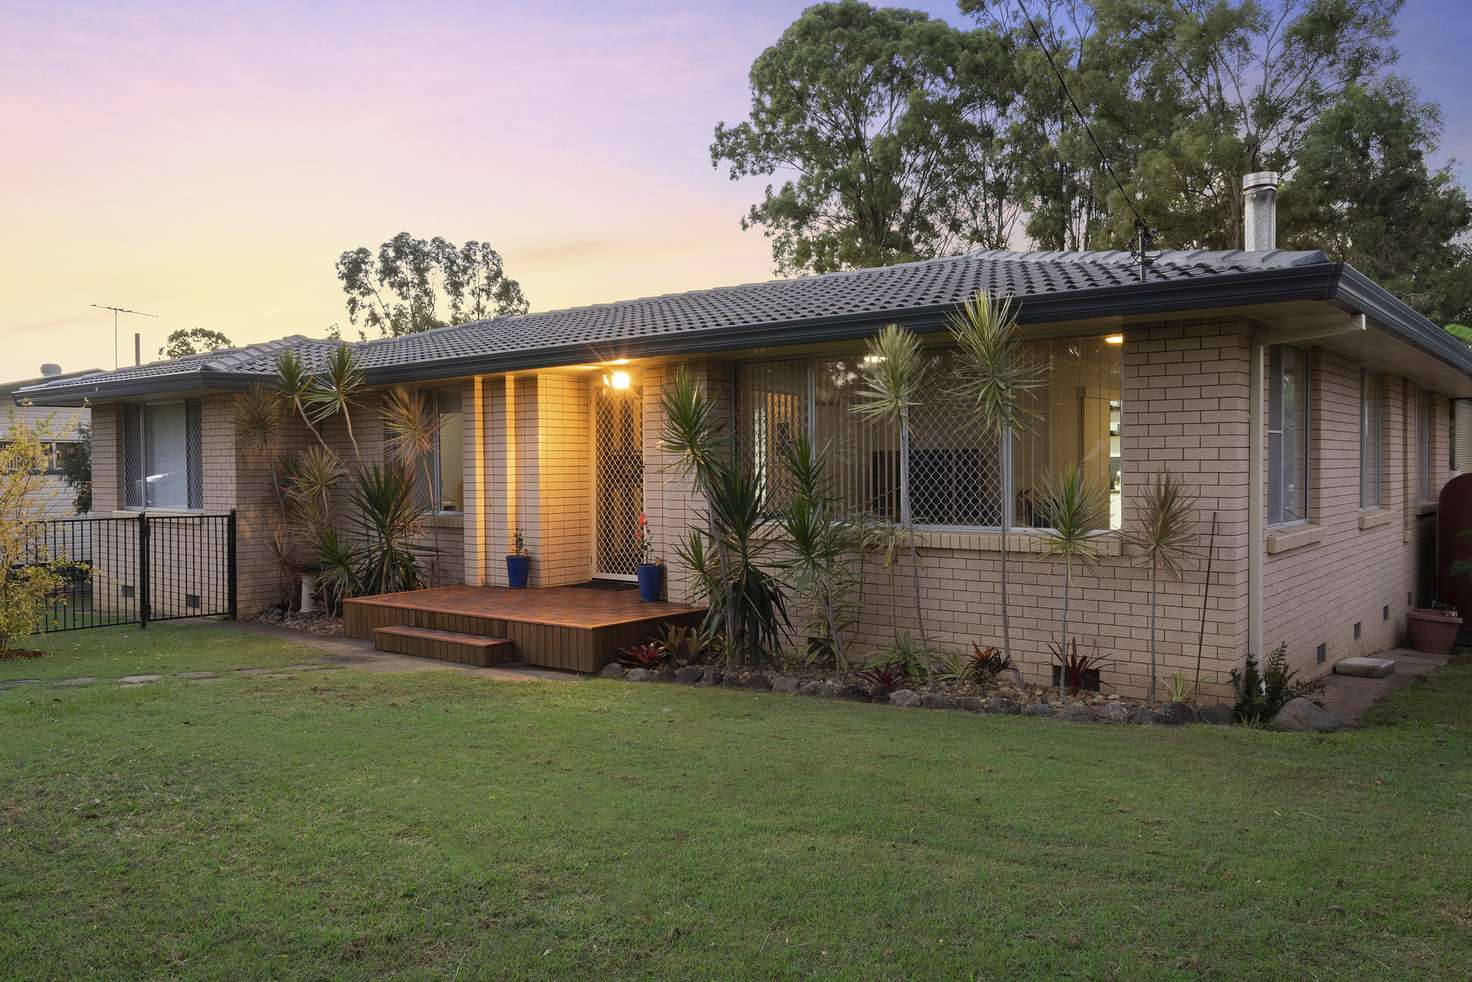 Main view of Homely house listing, 64 Eaglesfield St, Beaudesert QLD 4285